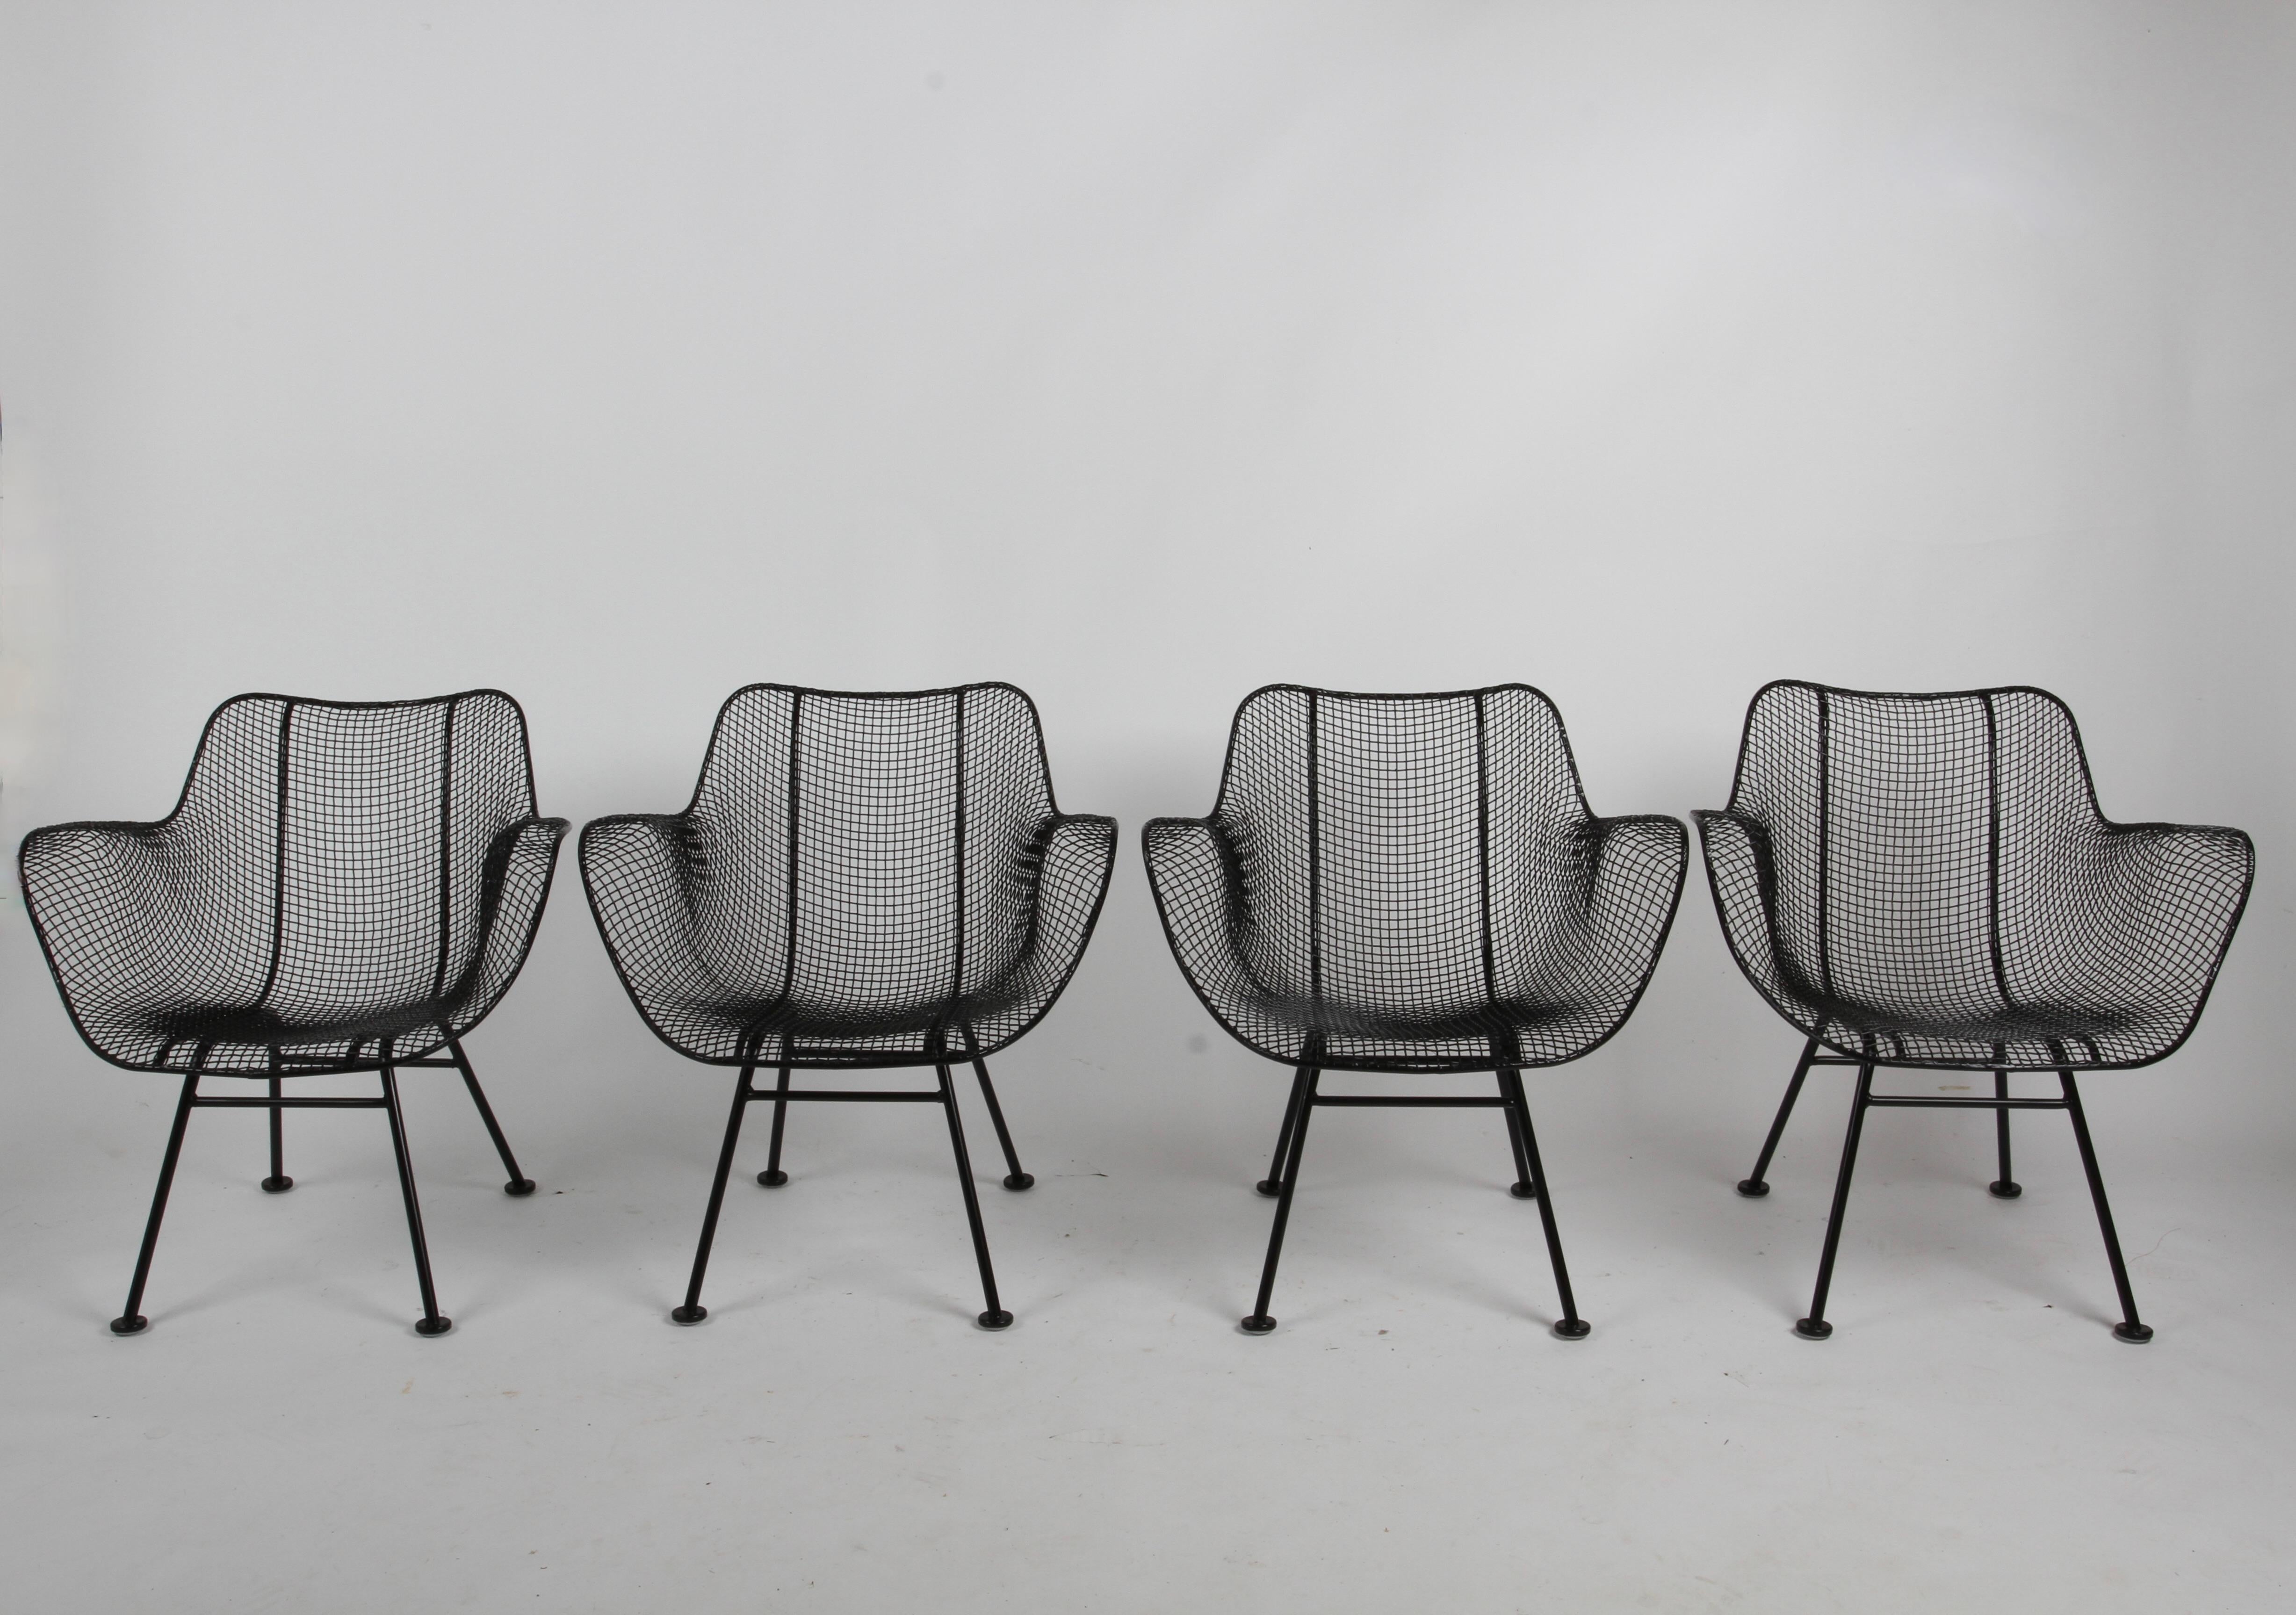 Newly restored set of four Iconic Russell Woodard Mid-Century Modern wire mesh lounge patio arm chairs from his 1950s Sculptura Line. Just back from the being sandblasted, dipped in rust inhibitor and painted in a satin black , with new glides. All